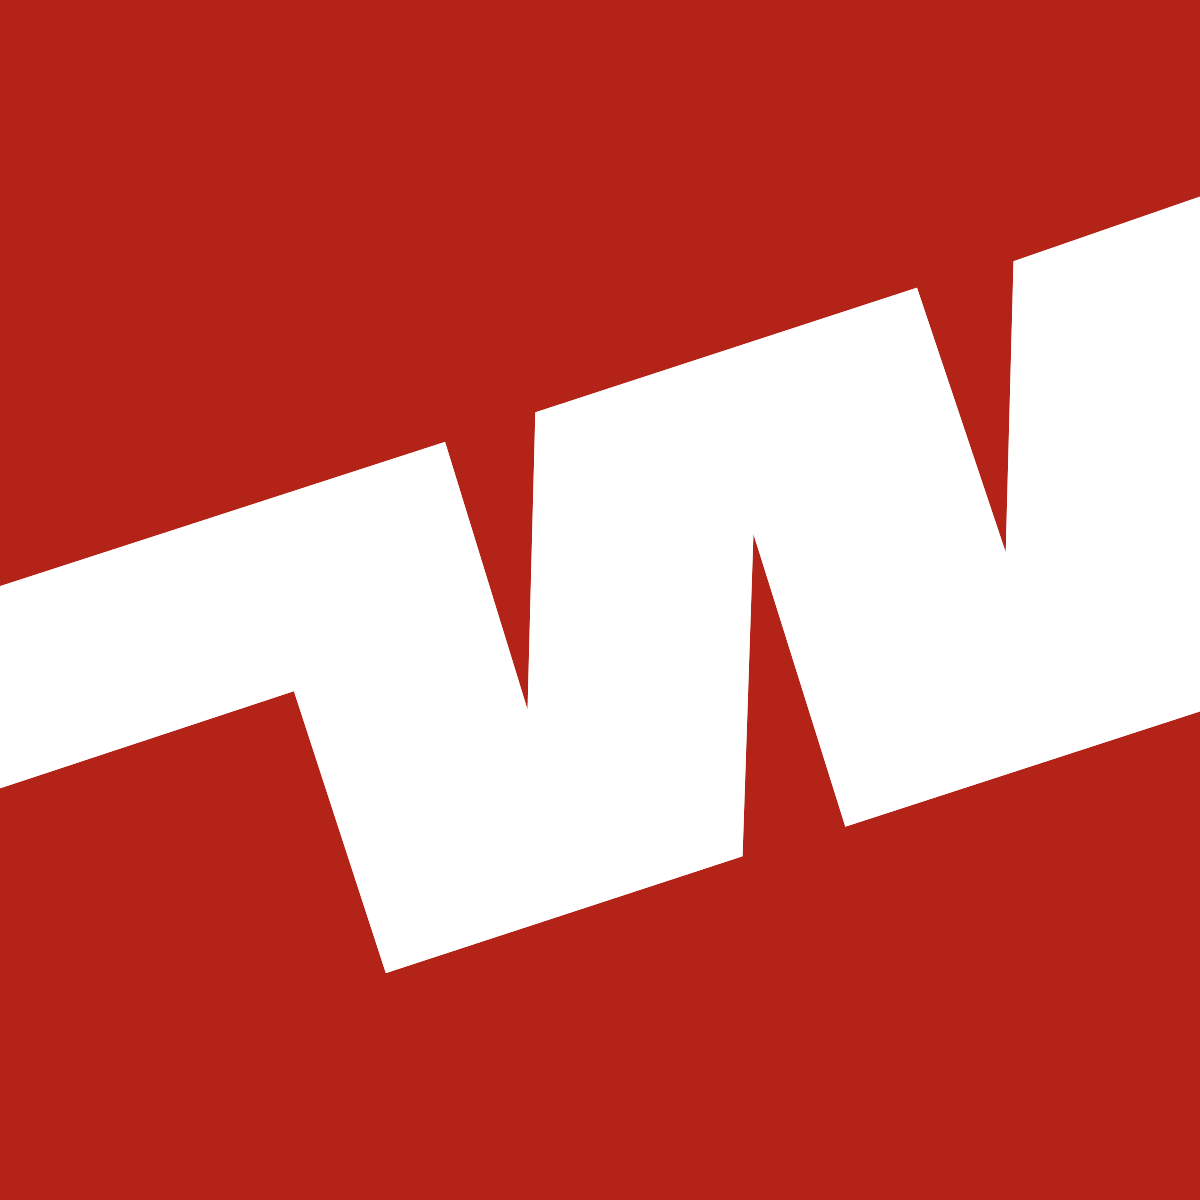 Red and White for the W Logo - Western Airlines